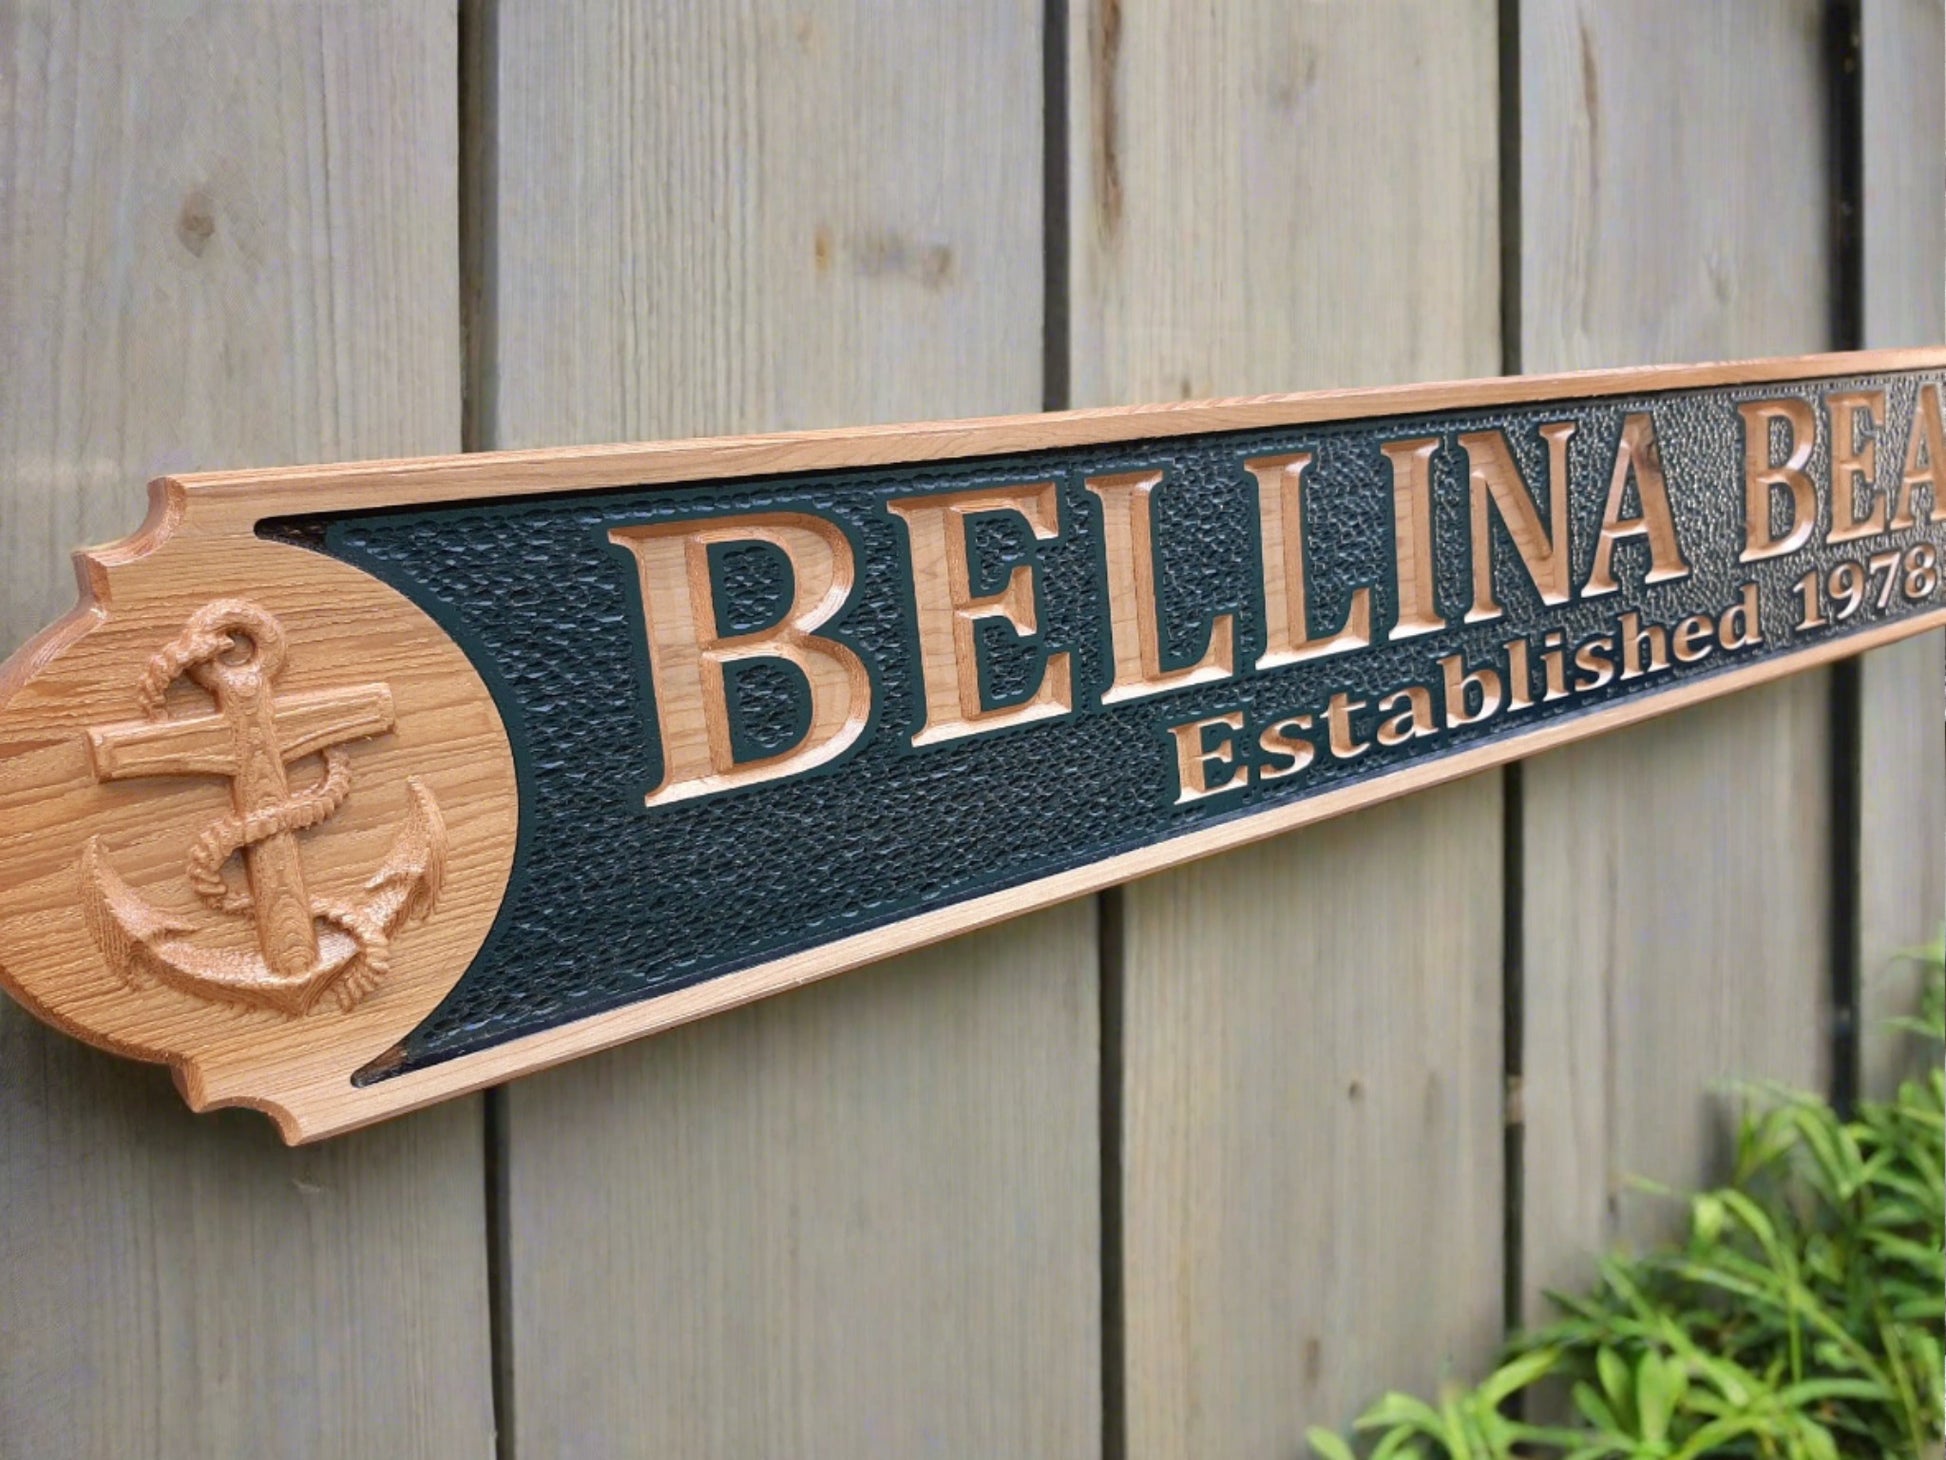 Custom Red Cedar outdoor Quarter board with established date. Made in the USA.